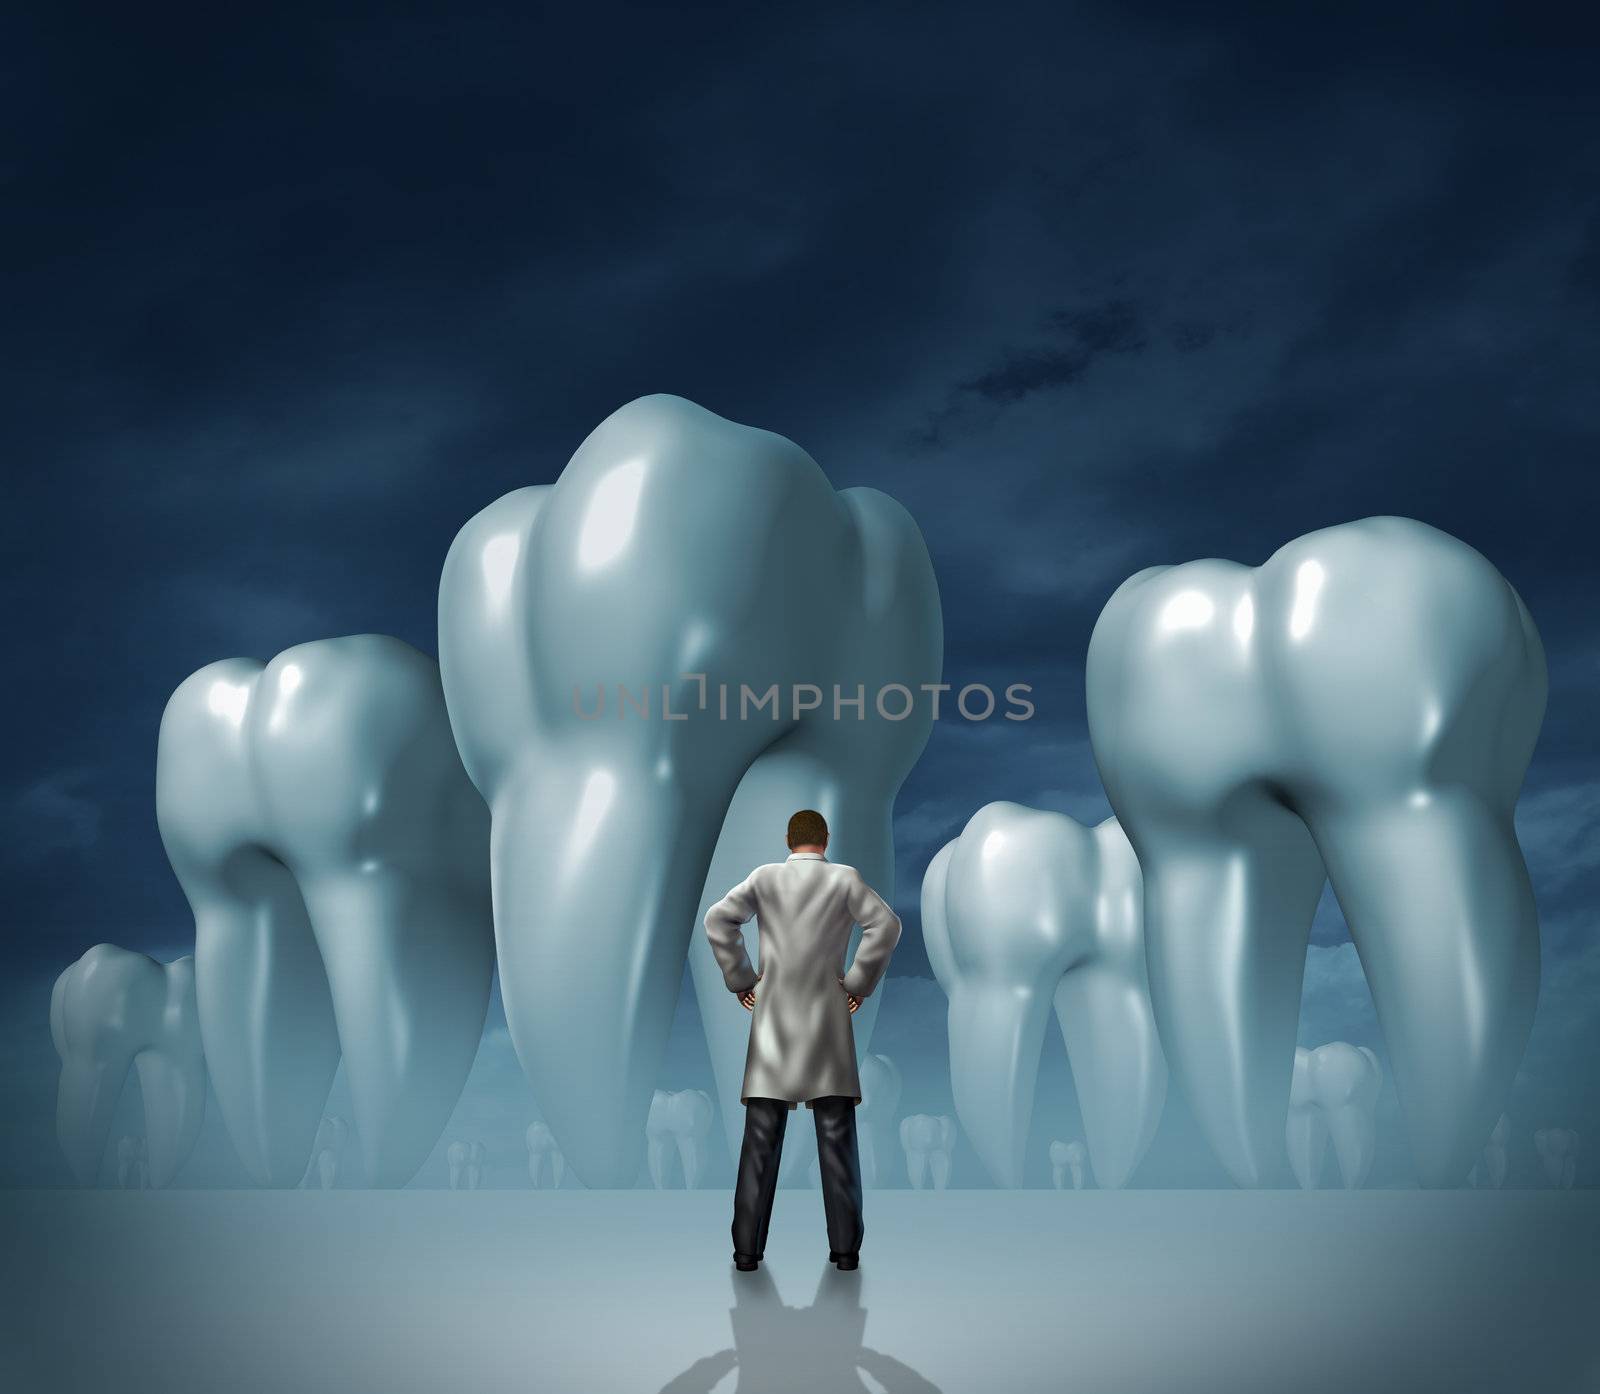 Dentist and dental care medical tooth health symbol of oral hygiene with a professional man in a white lab coat facing giant molar teeth on a dark foggy background.